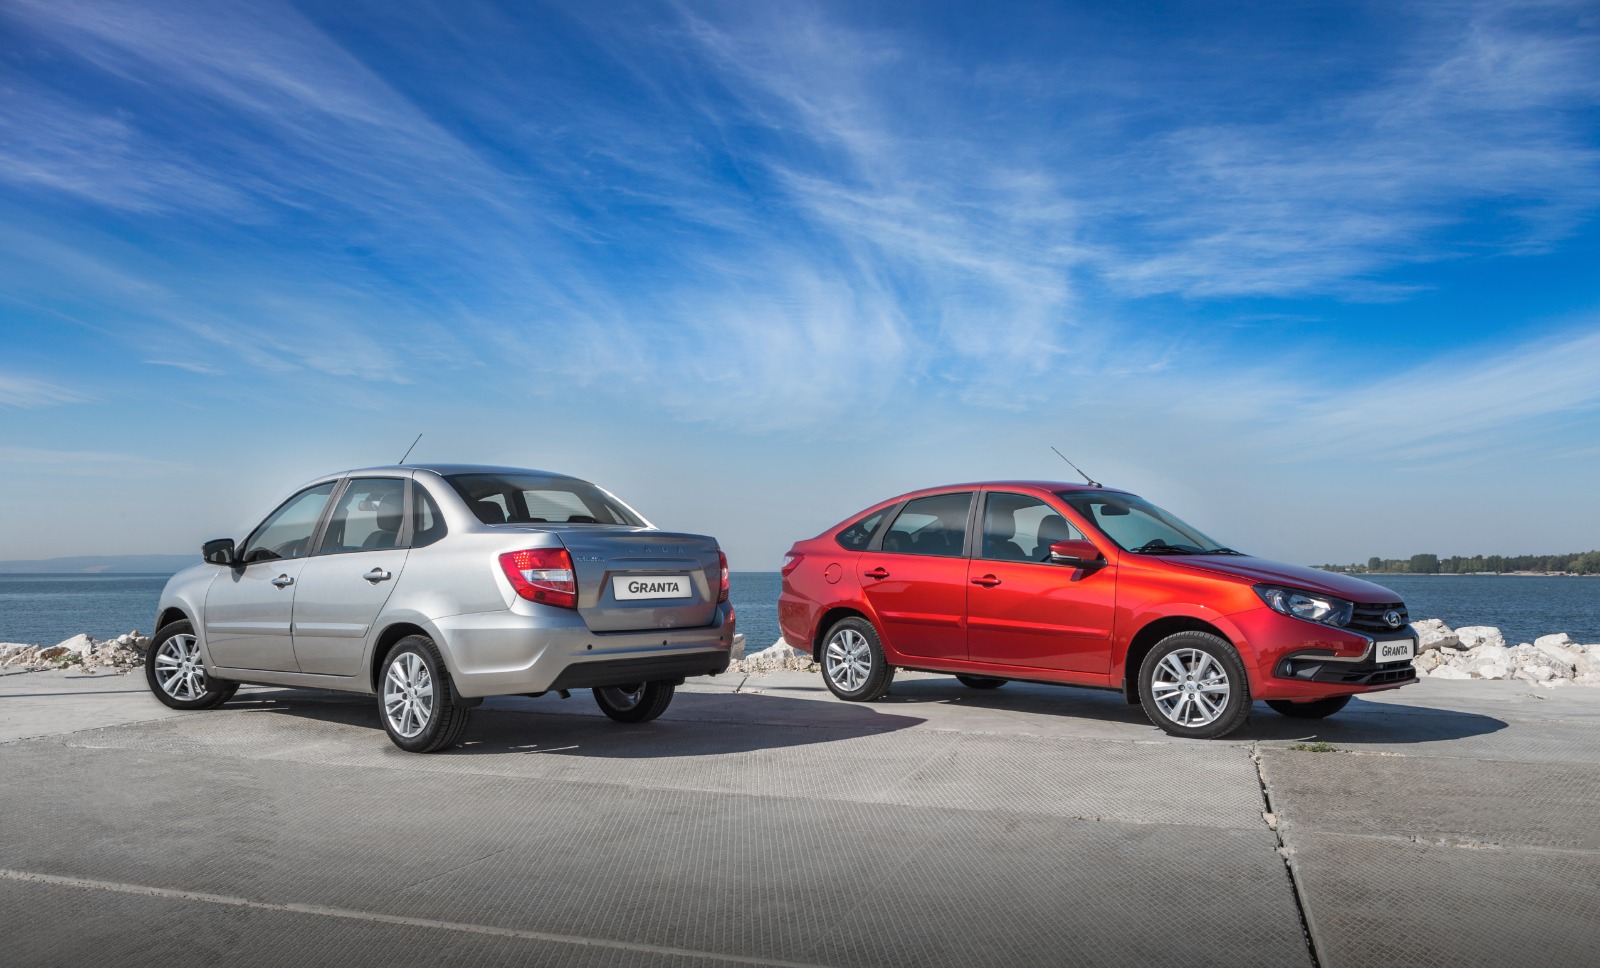 LADA GRANTA WITH AUTOMATIC TRANSMISSION IS ALREADY AVAILABLE AT DEALERS’ SHOWROOMS